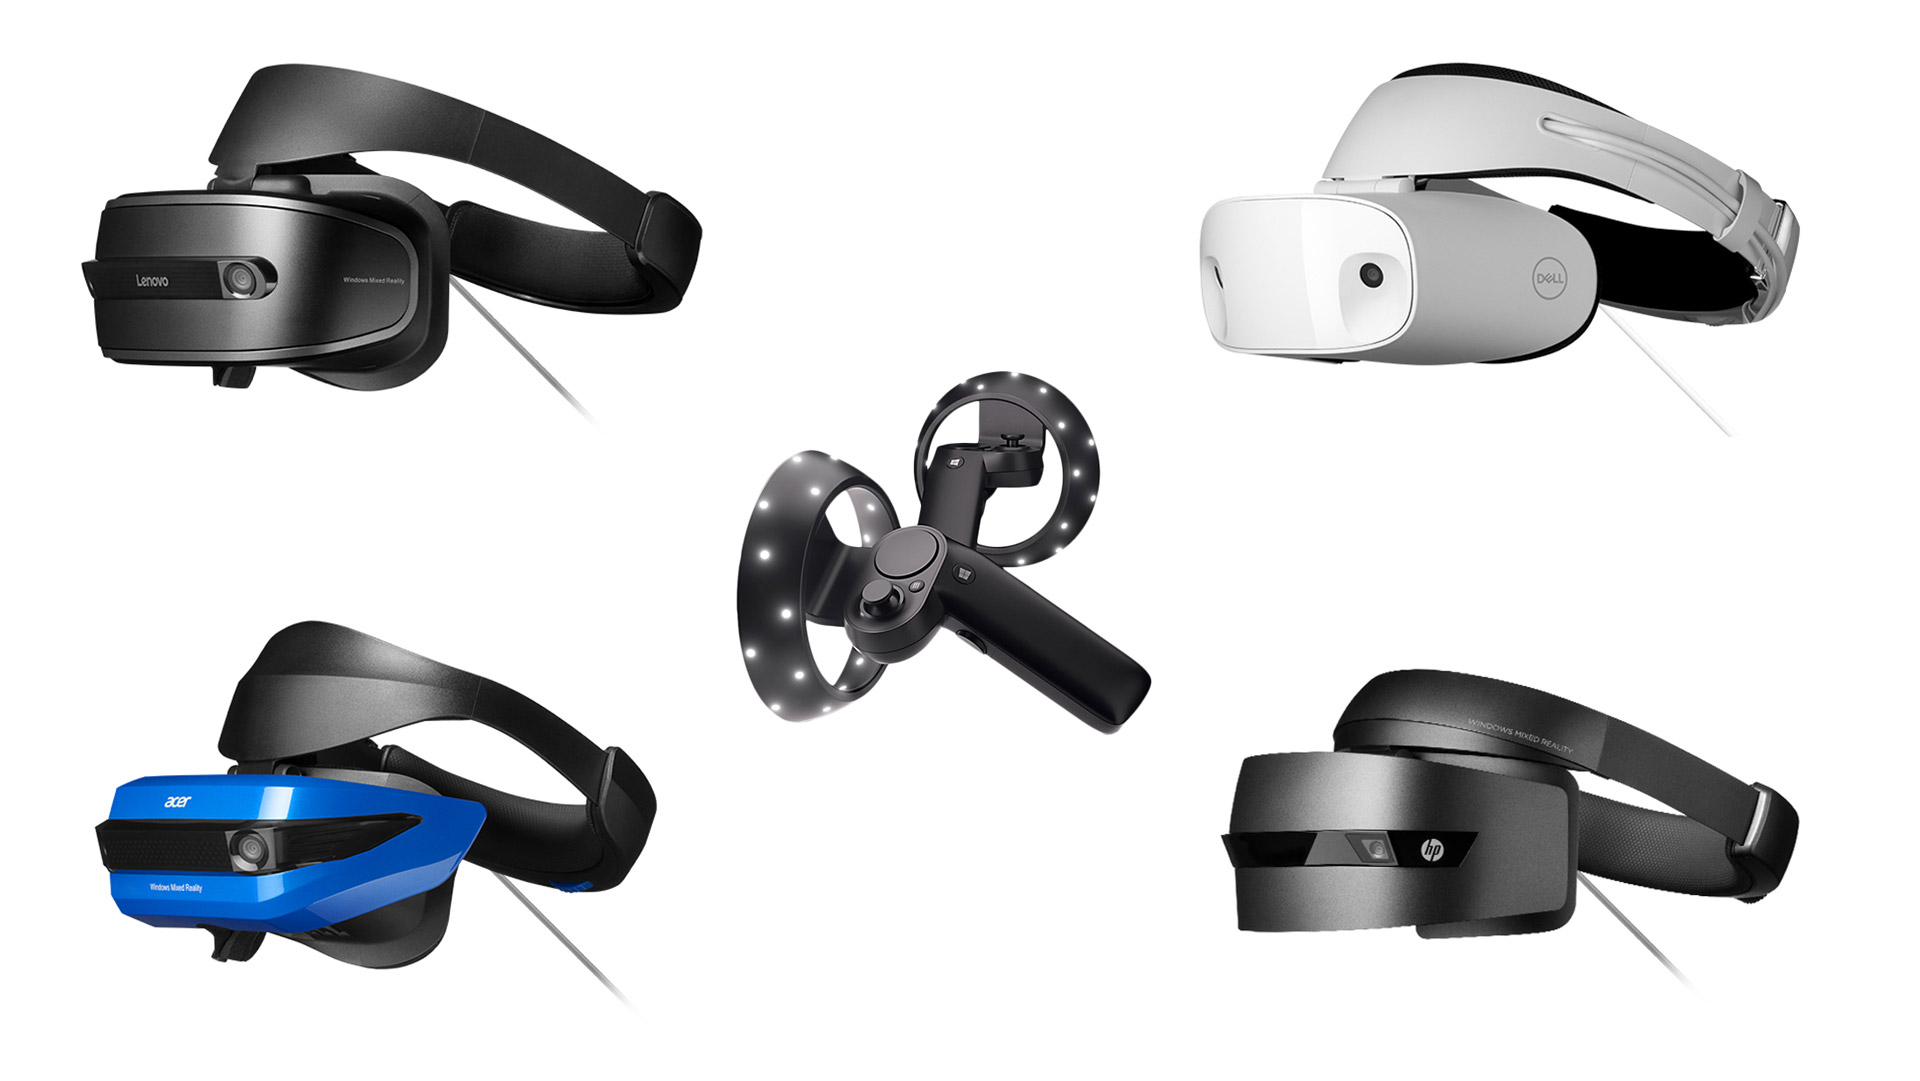 VR Headset Controller Bundles Launch This Holiday at $400 – Road VR